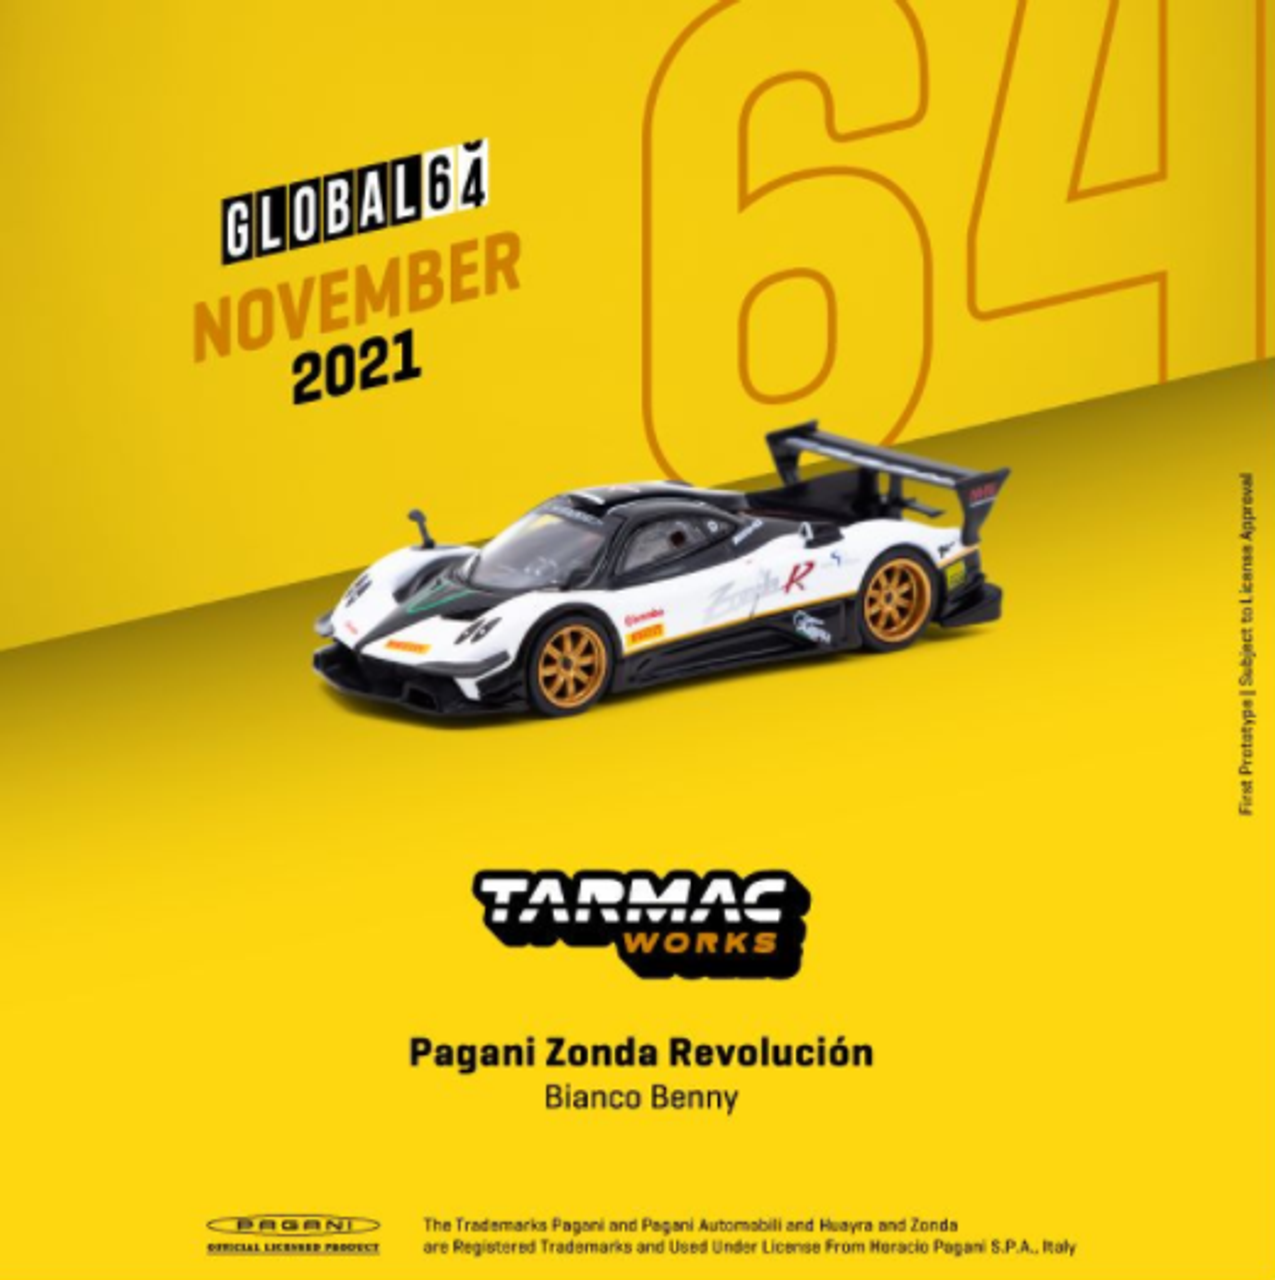 Pagani Zonda Revolucion Bianco Benny White and Black with Graphics "Global64" Series 1/64 Diecast Model Car by Tarmac Works